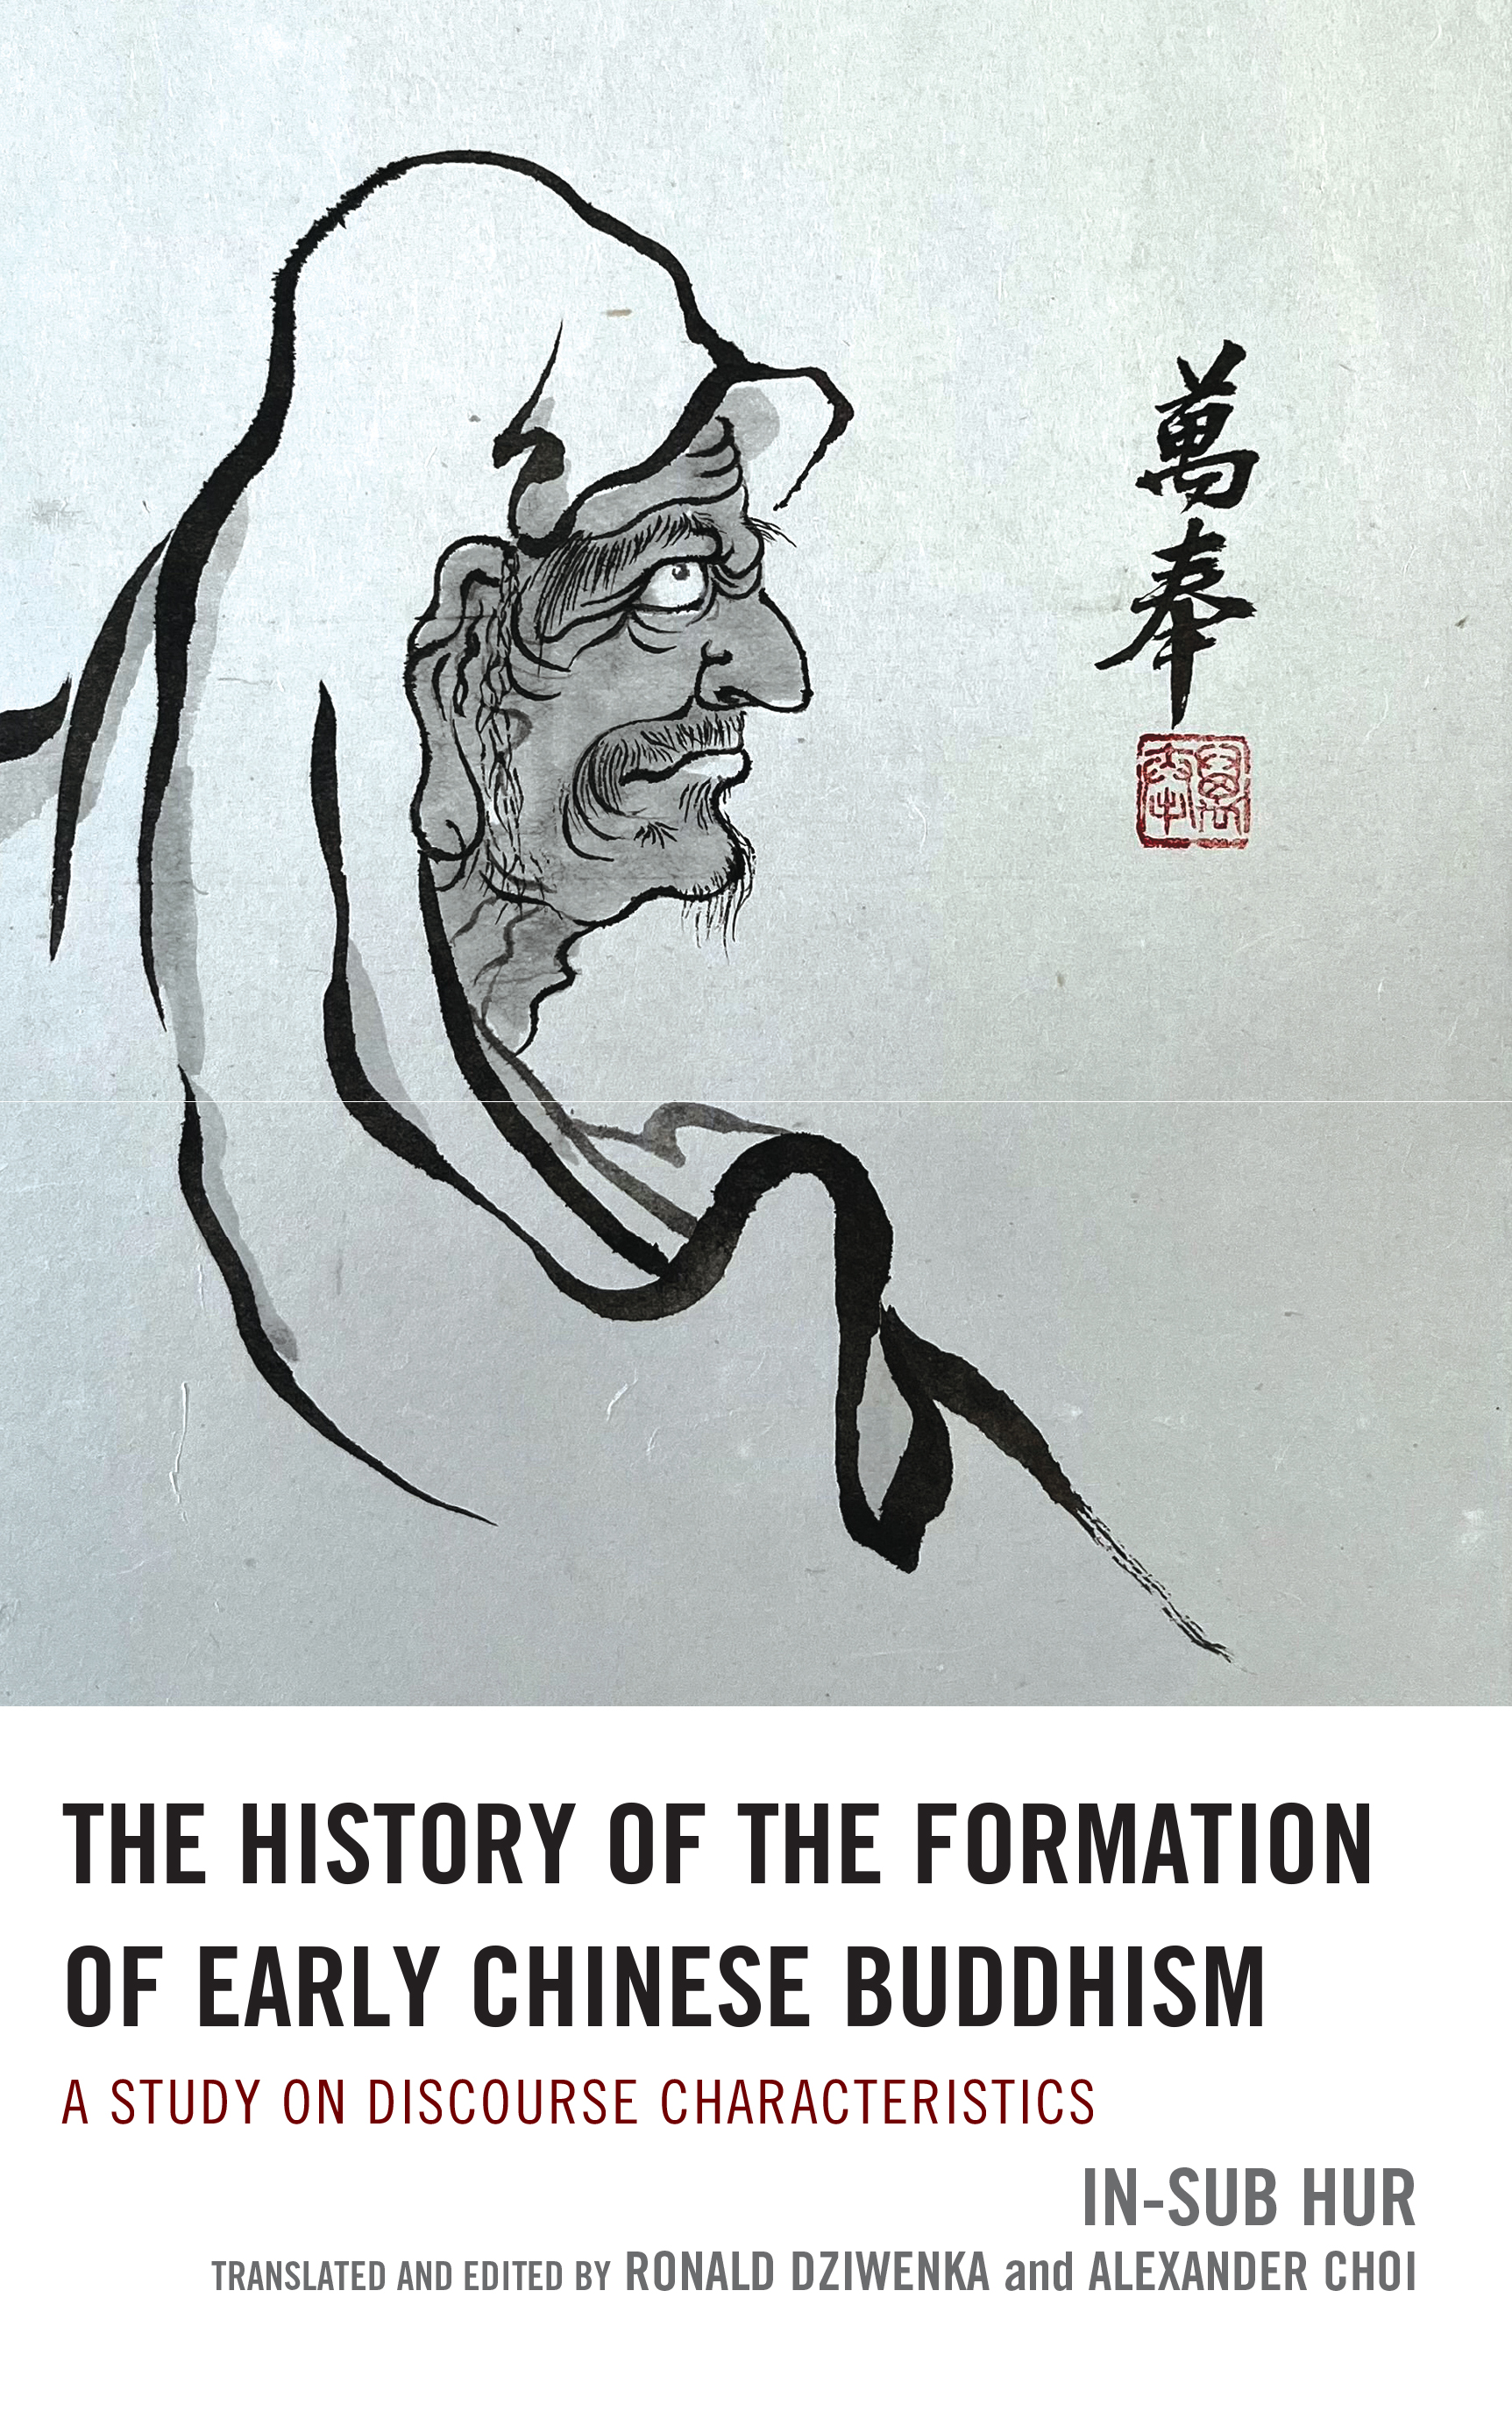 The History of the Formation of Early Chinese Buddhism: A Study on Discourse Characteristics